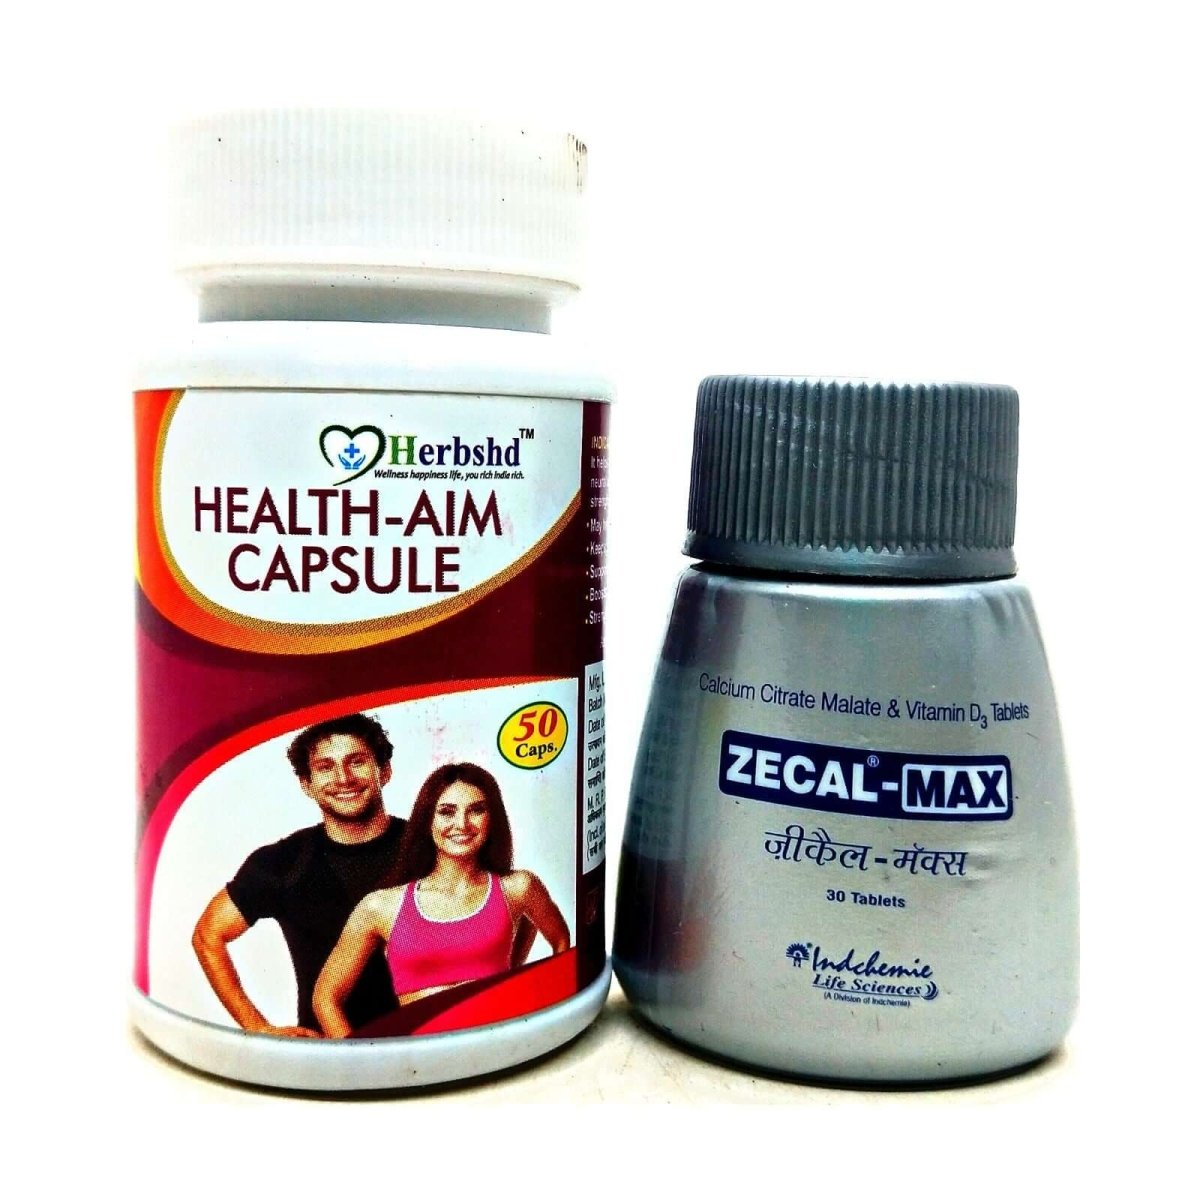 Zecal - Max tablet & Health ami capsule (combo pack)